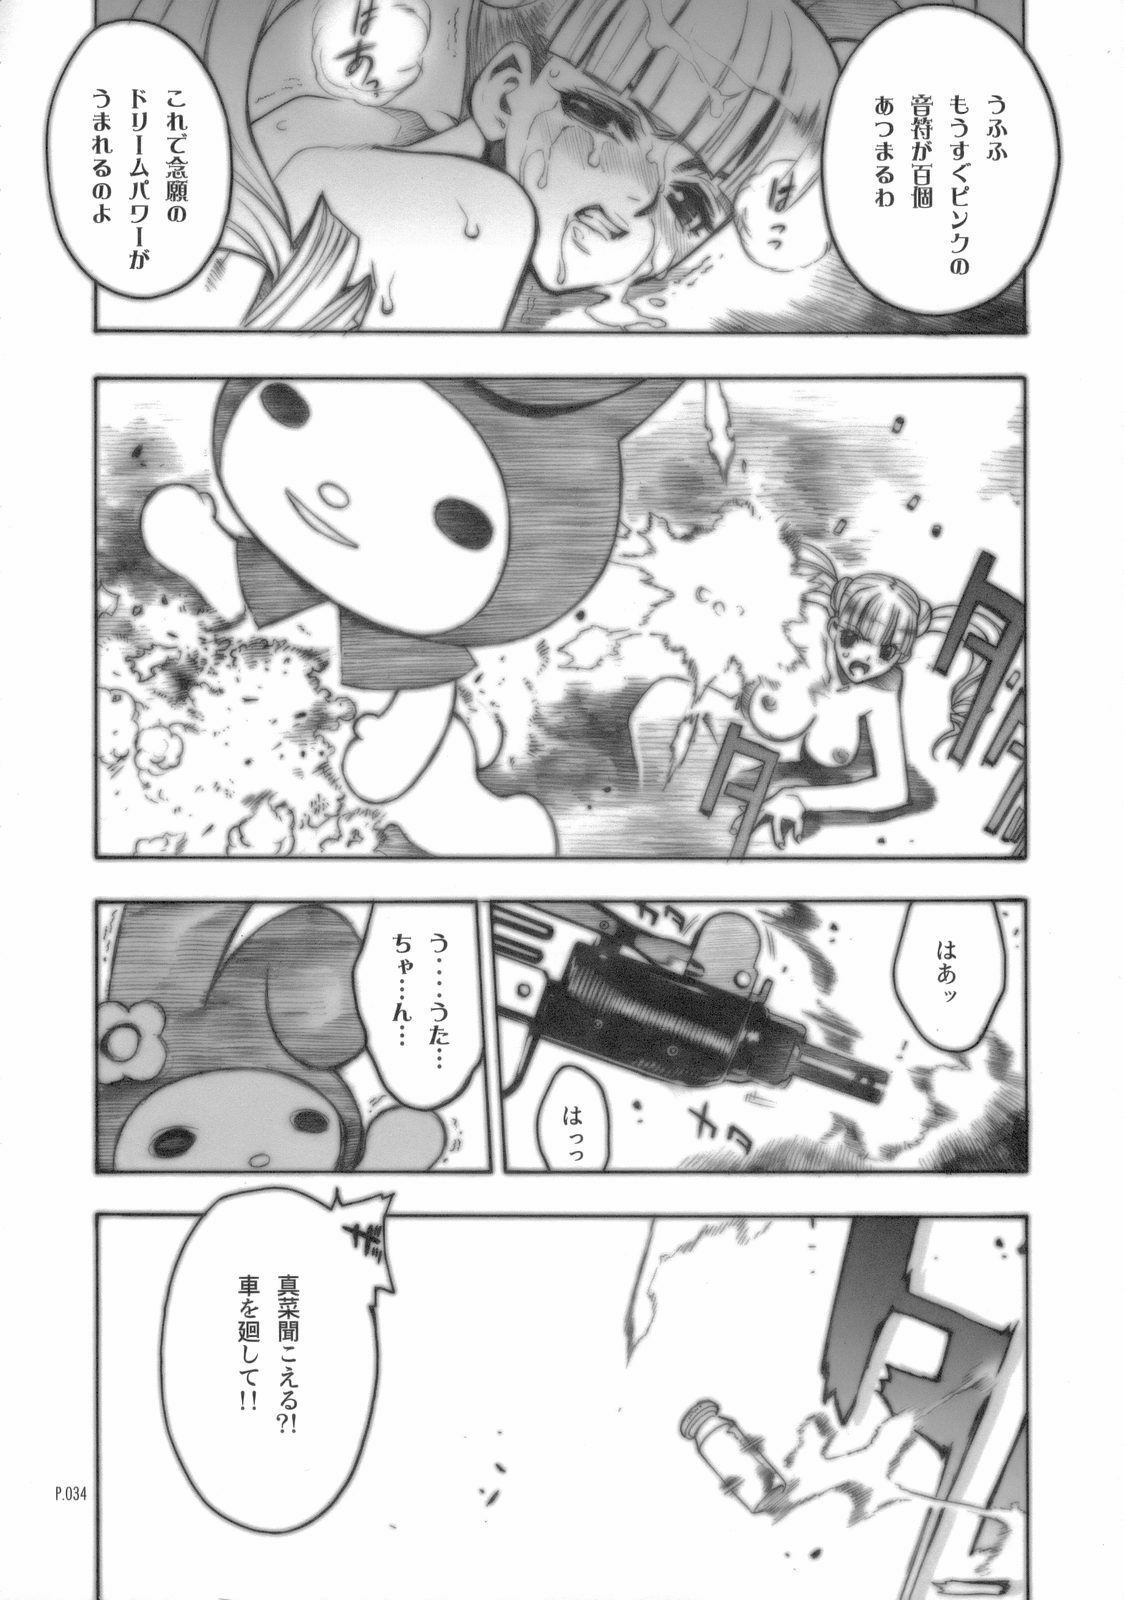 [Piggstar (Nagoya Shachihachi)] Absolute Melody (Onegai My Melody) page 33 full